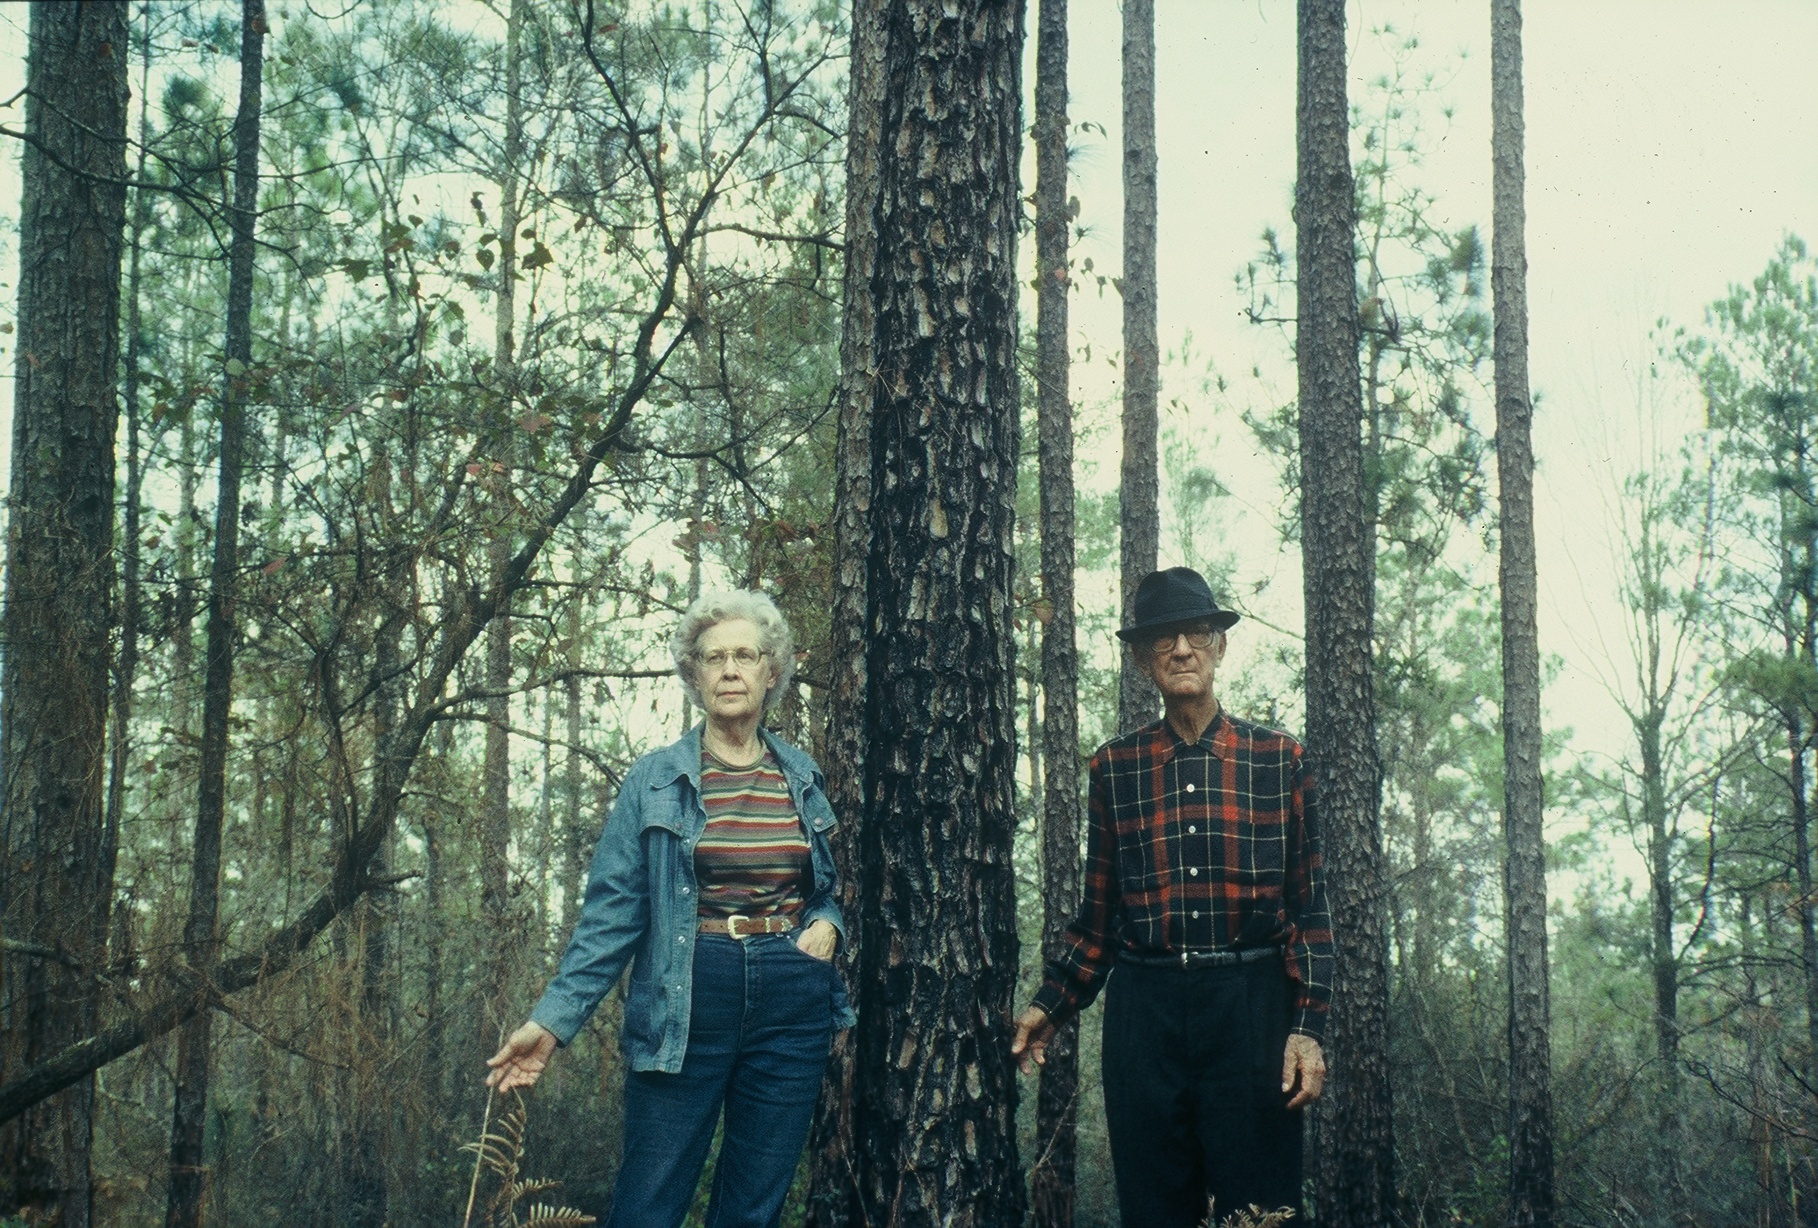 Solon and Martha Dixon standing in a mature pine stand